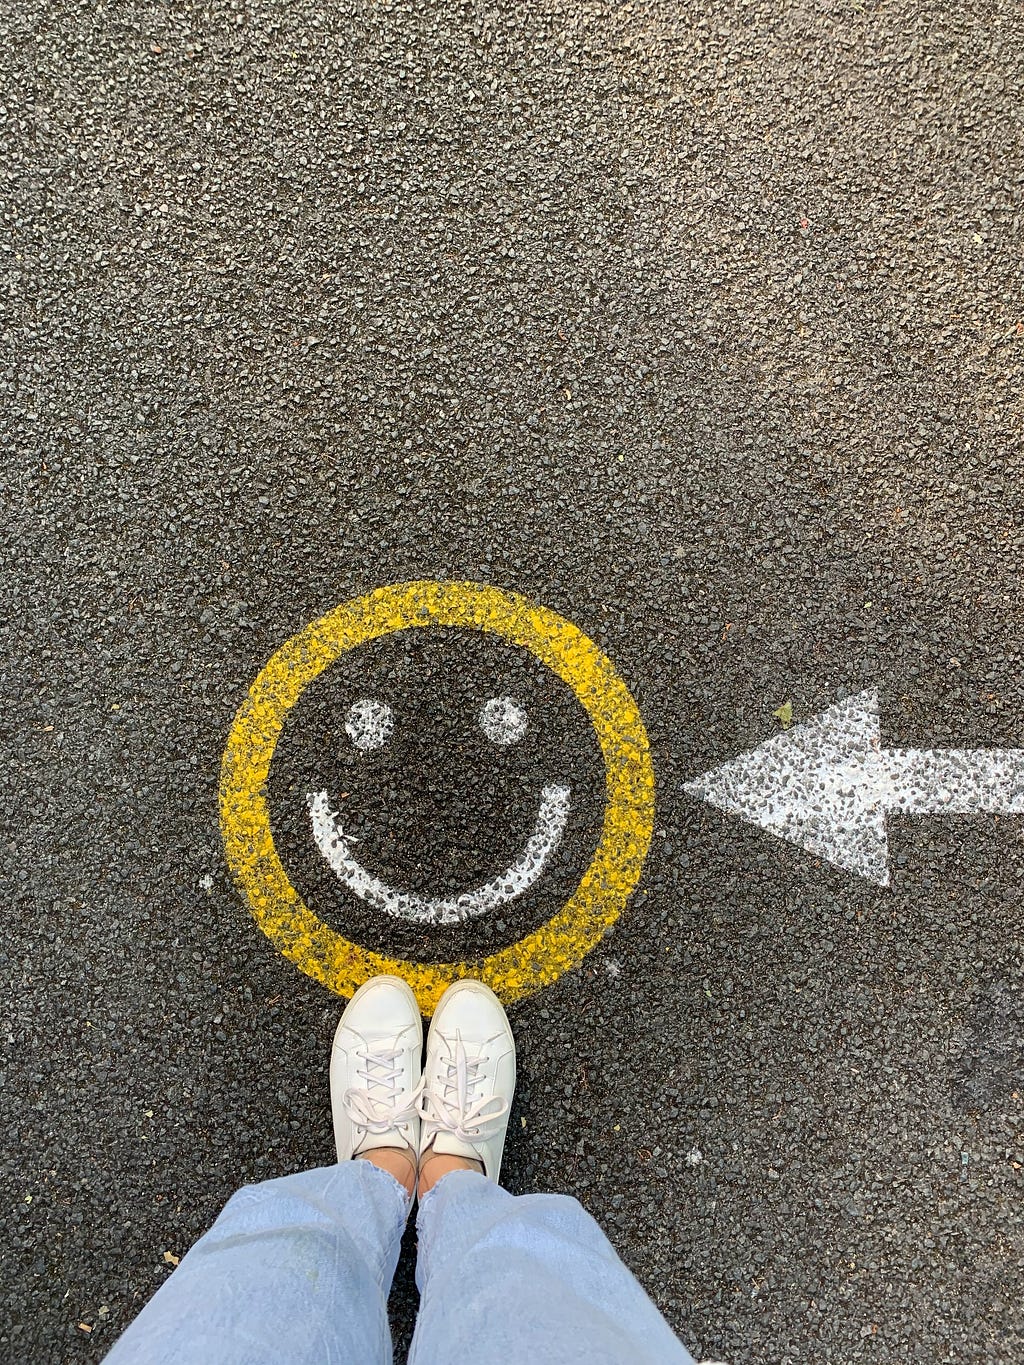 A person’s feet in front of a smiling emoji